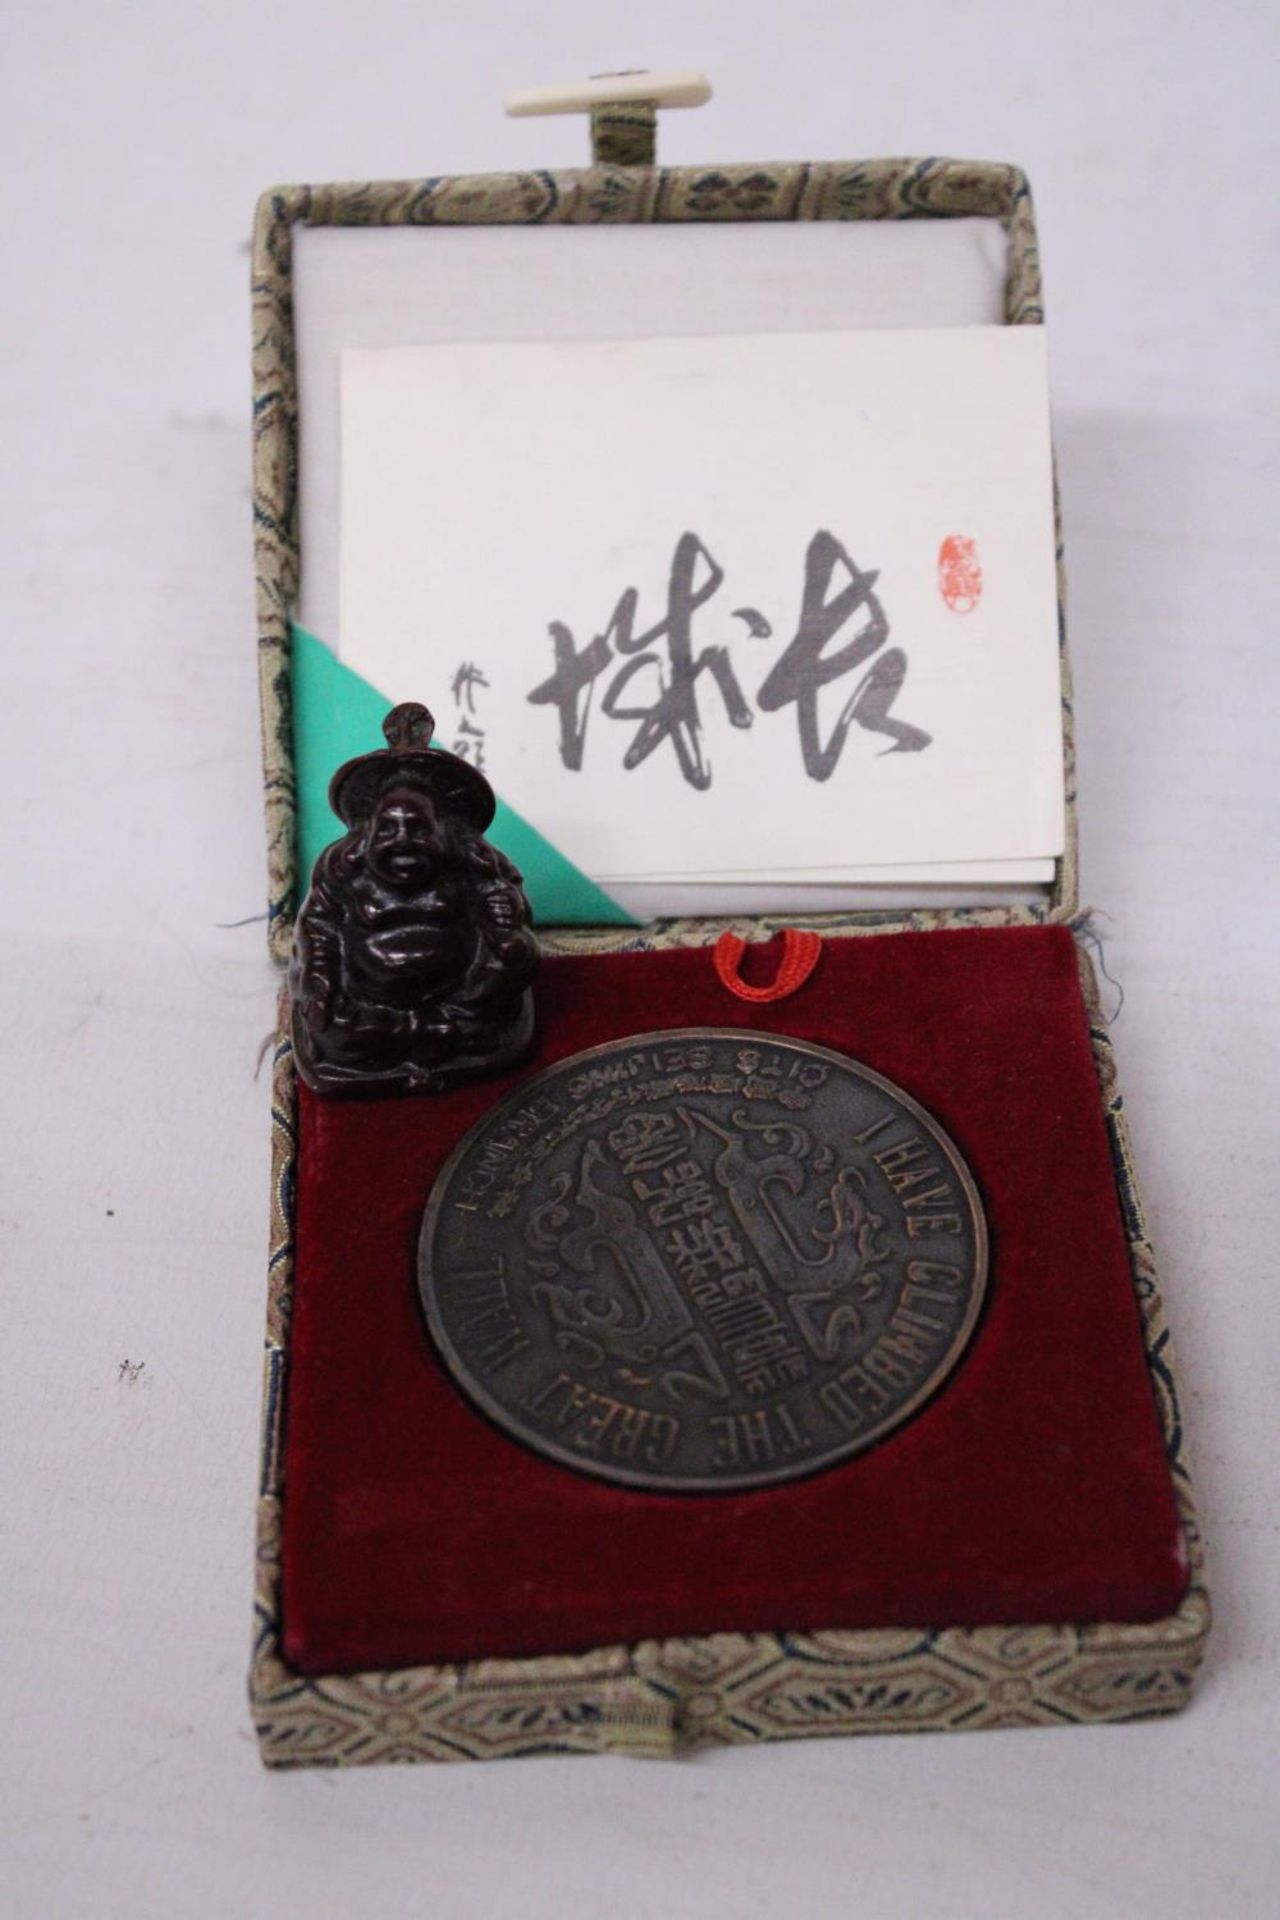 A BOXED BRONZE MEDAL "GREAT WALL OF CHINA" WITH A MINIATURE BUDDAH